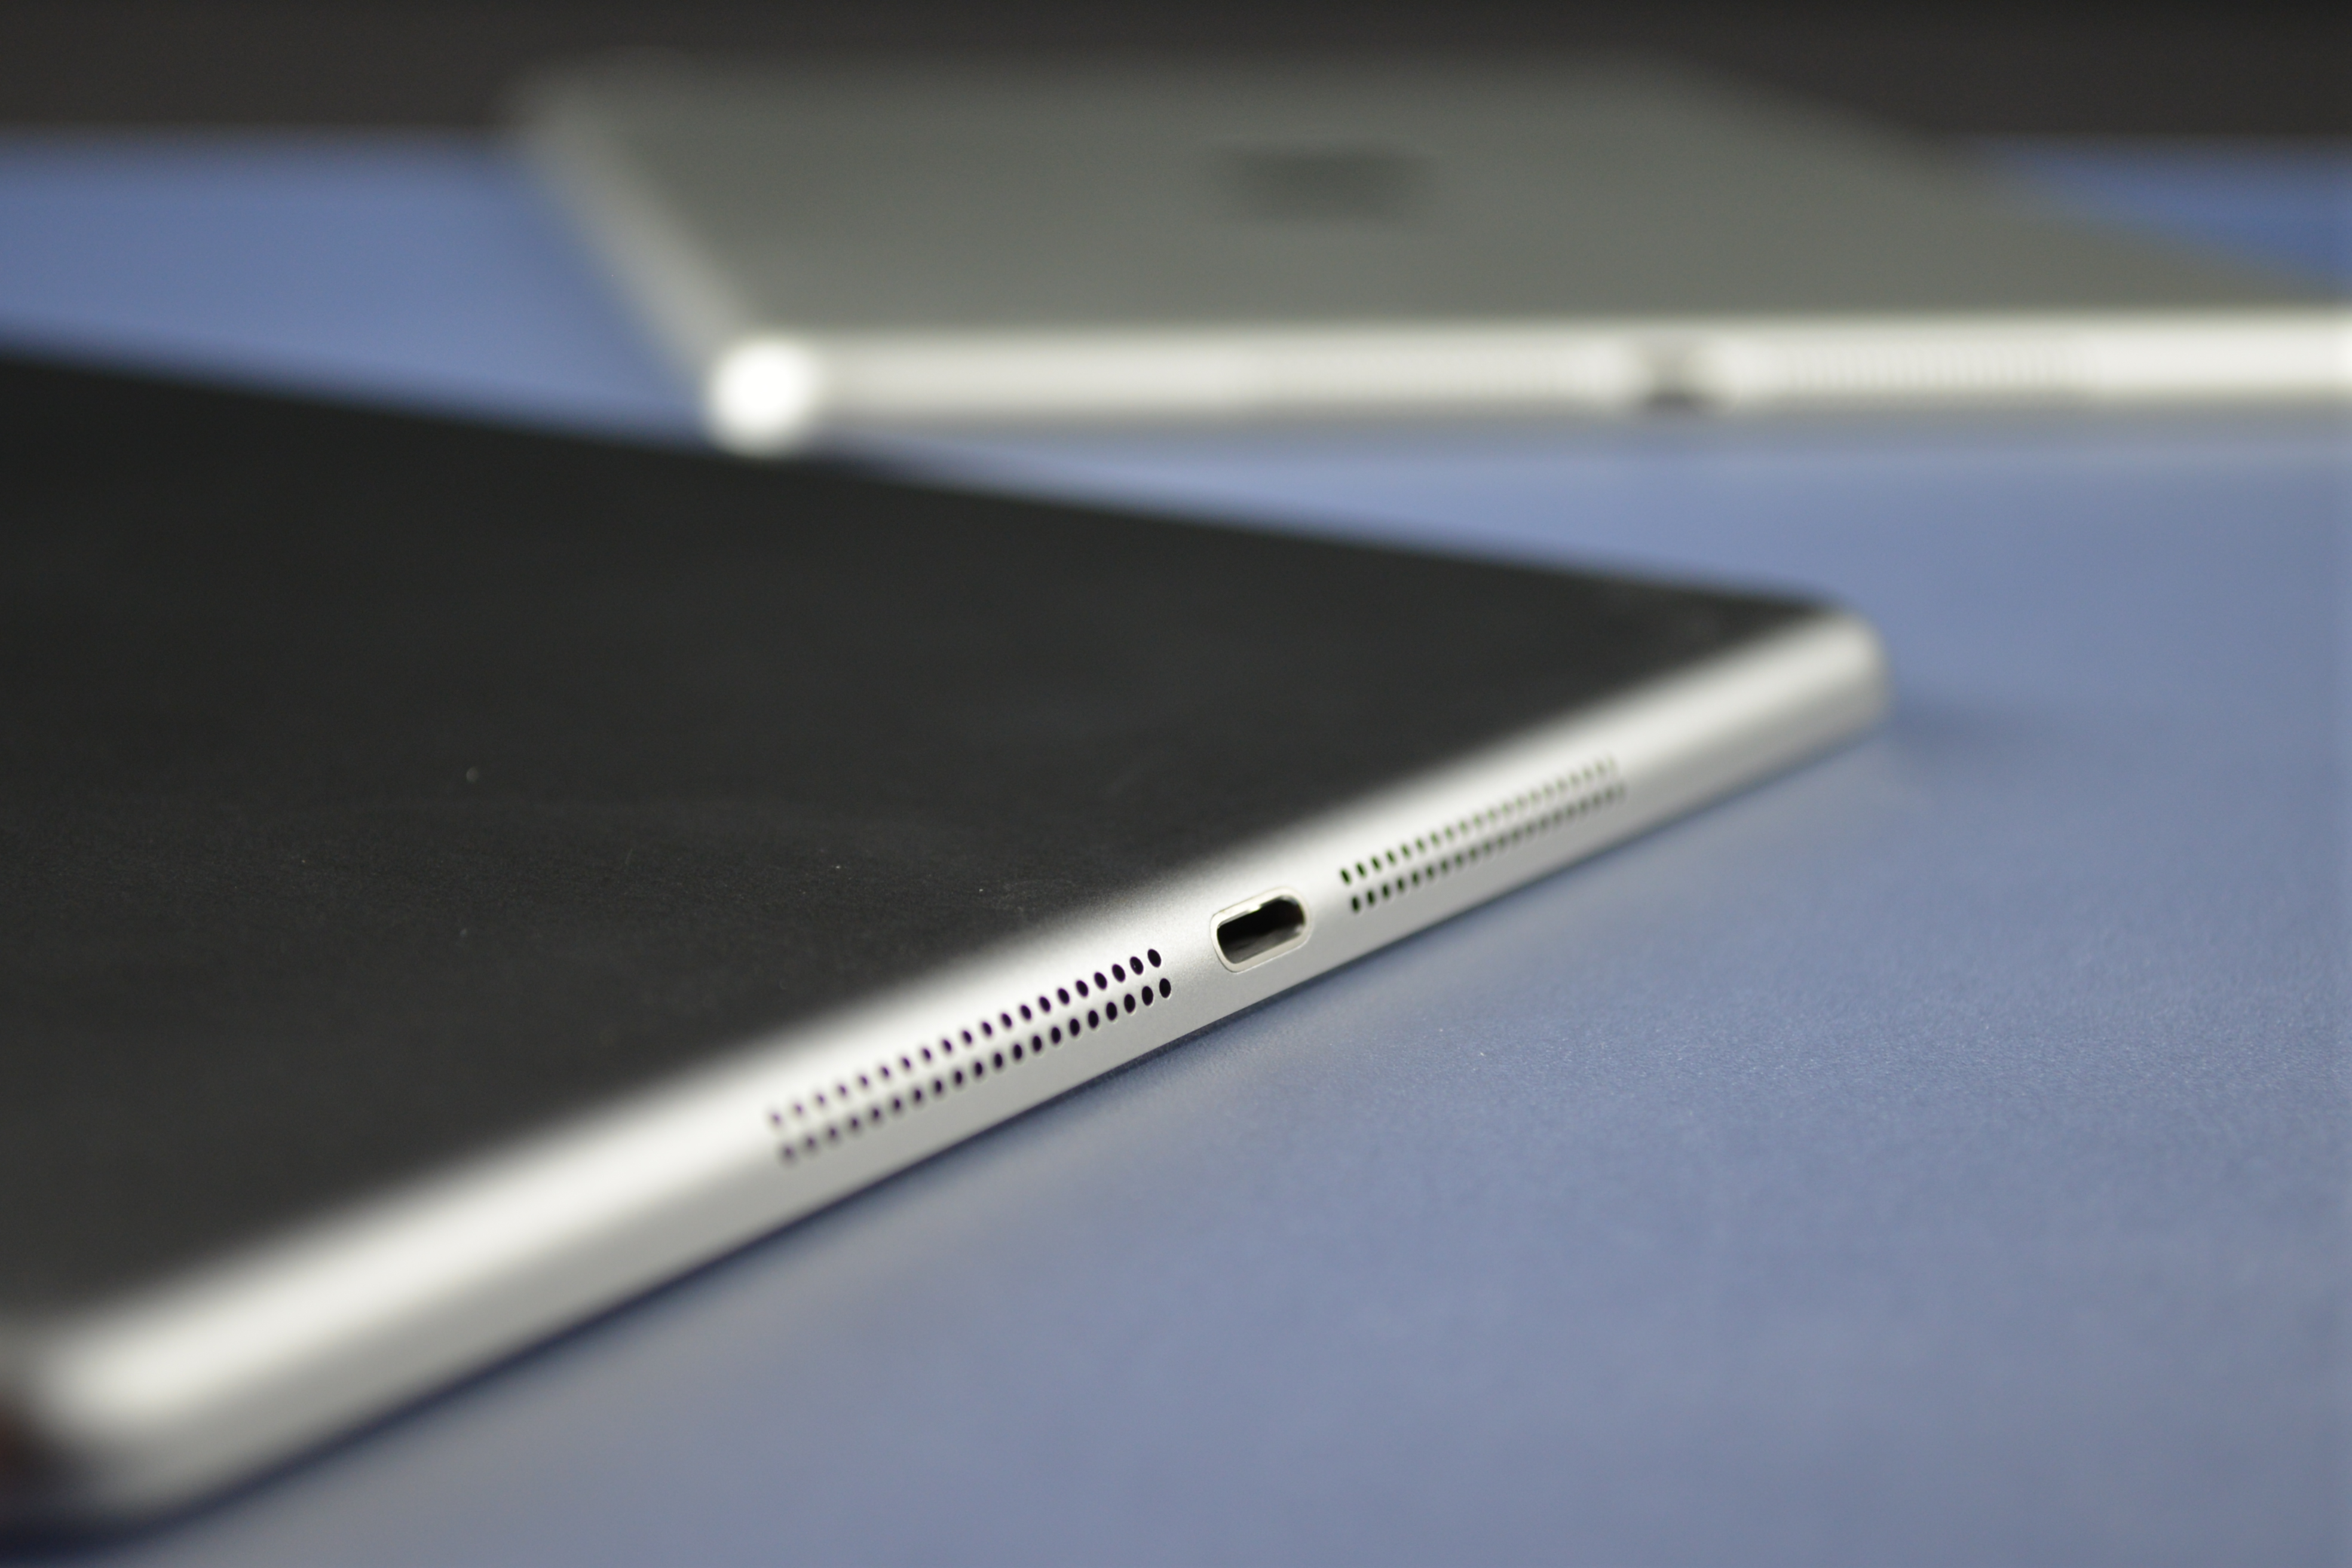 iPad 5 to come in Space Gray